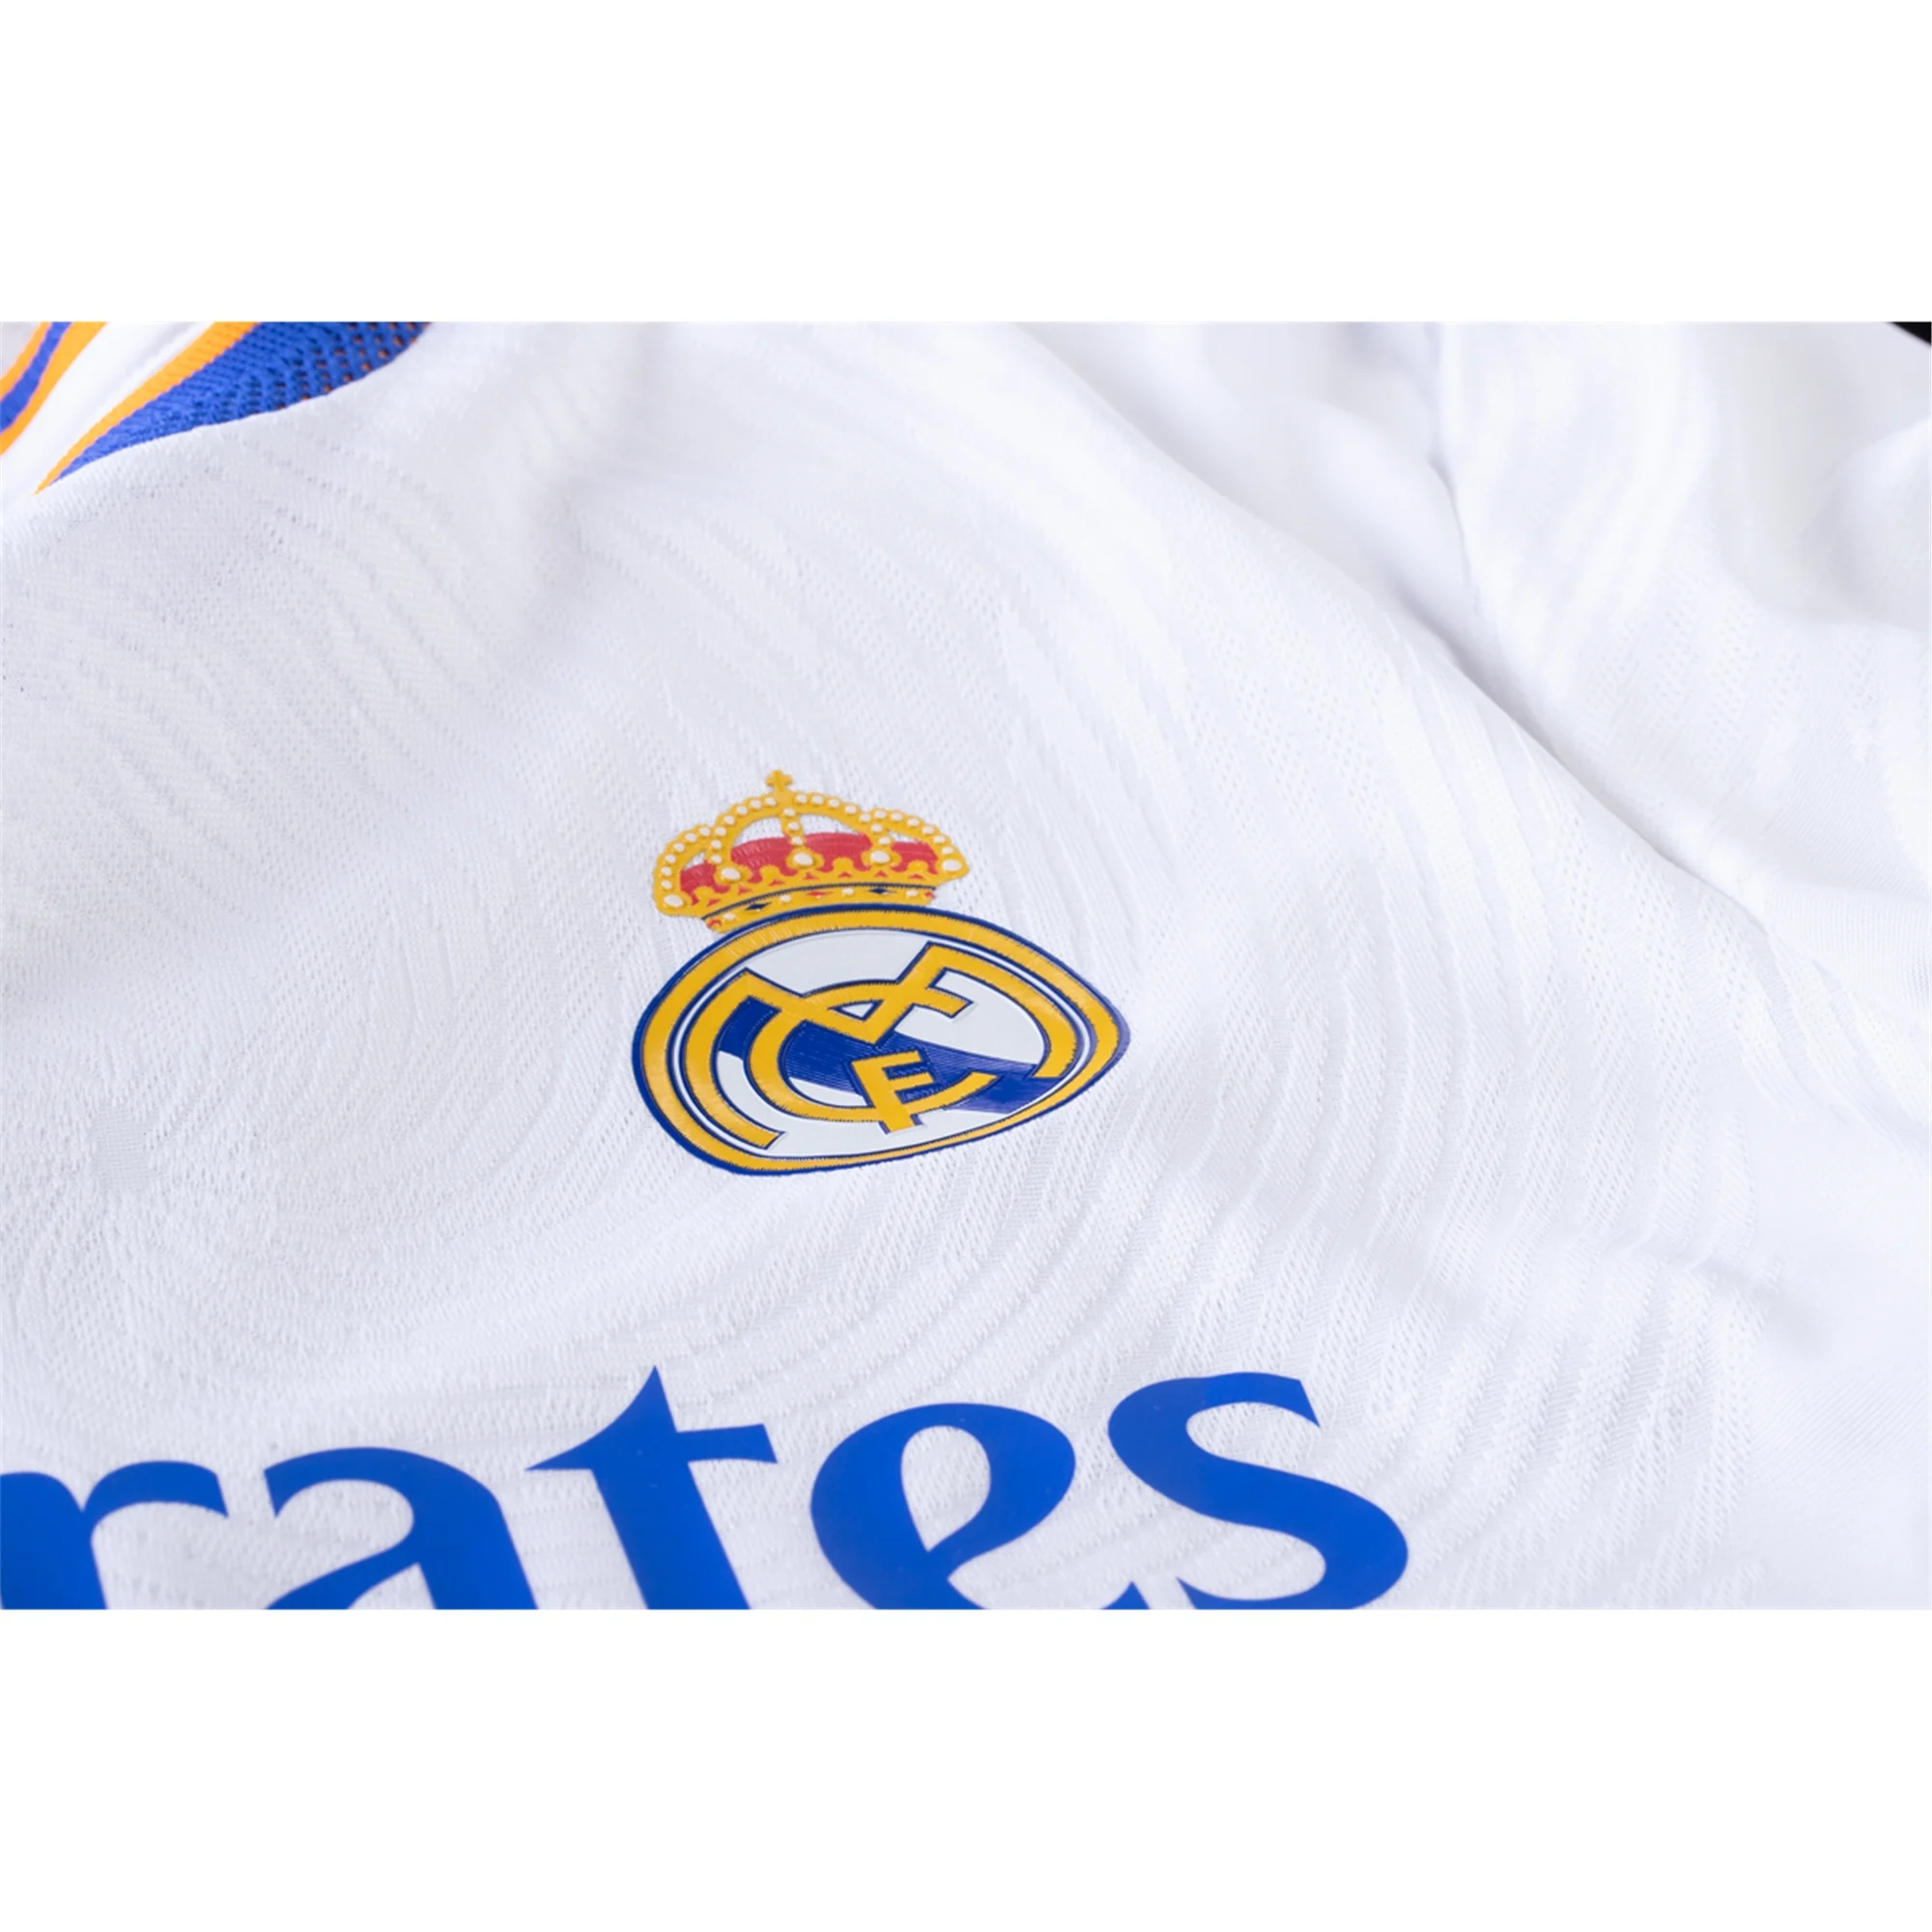 real madrid jersey 2021/22